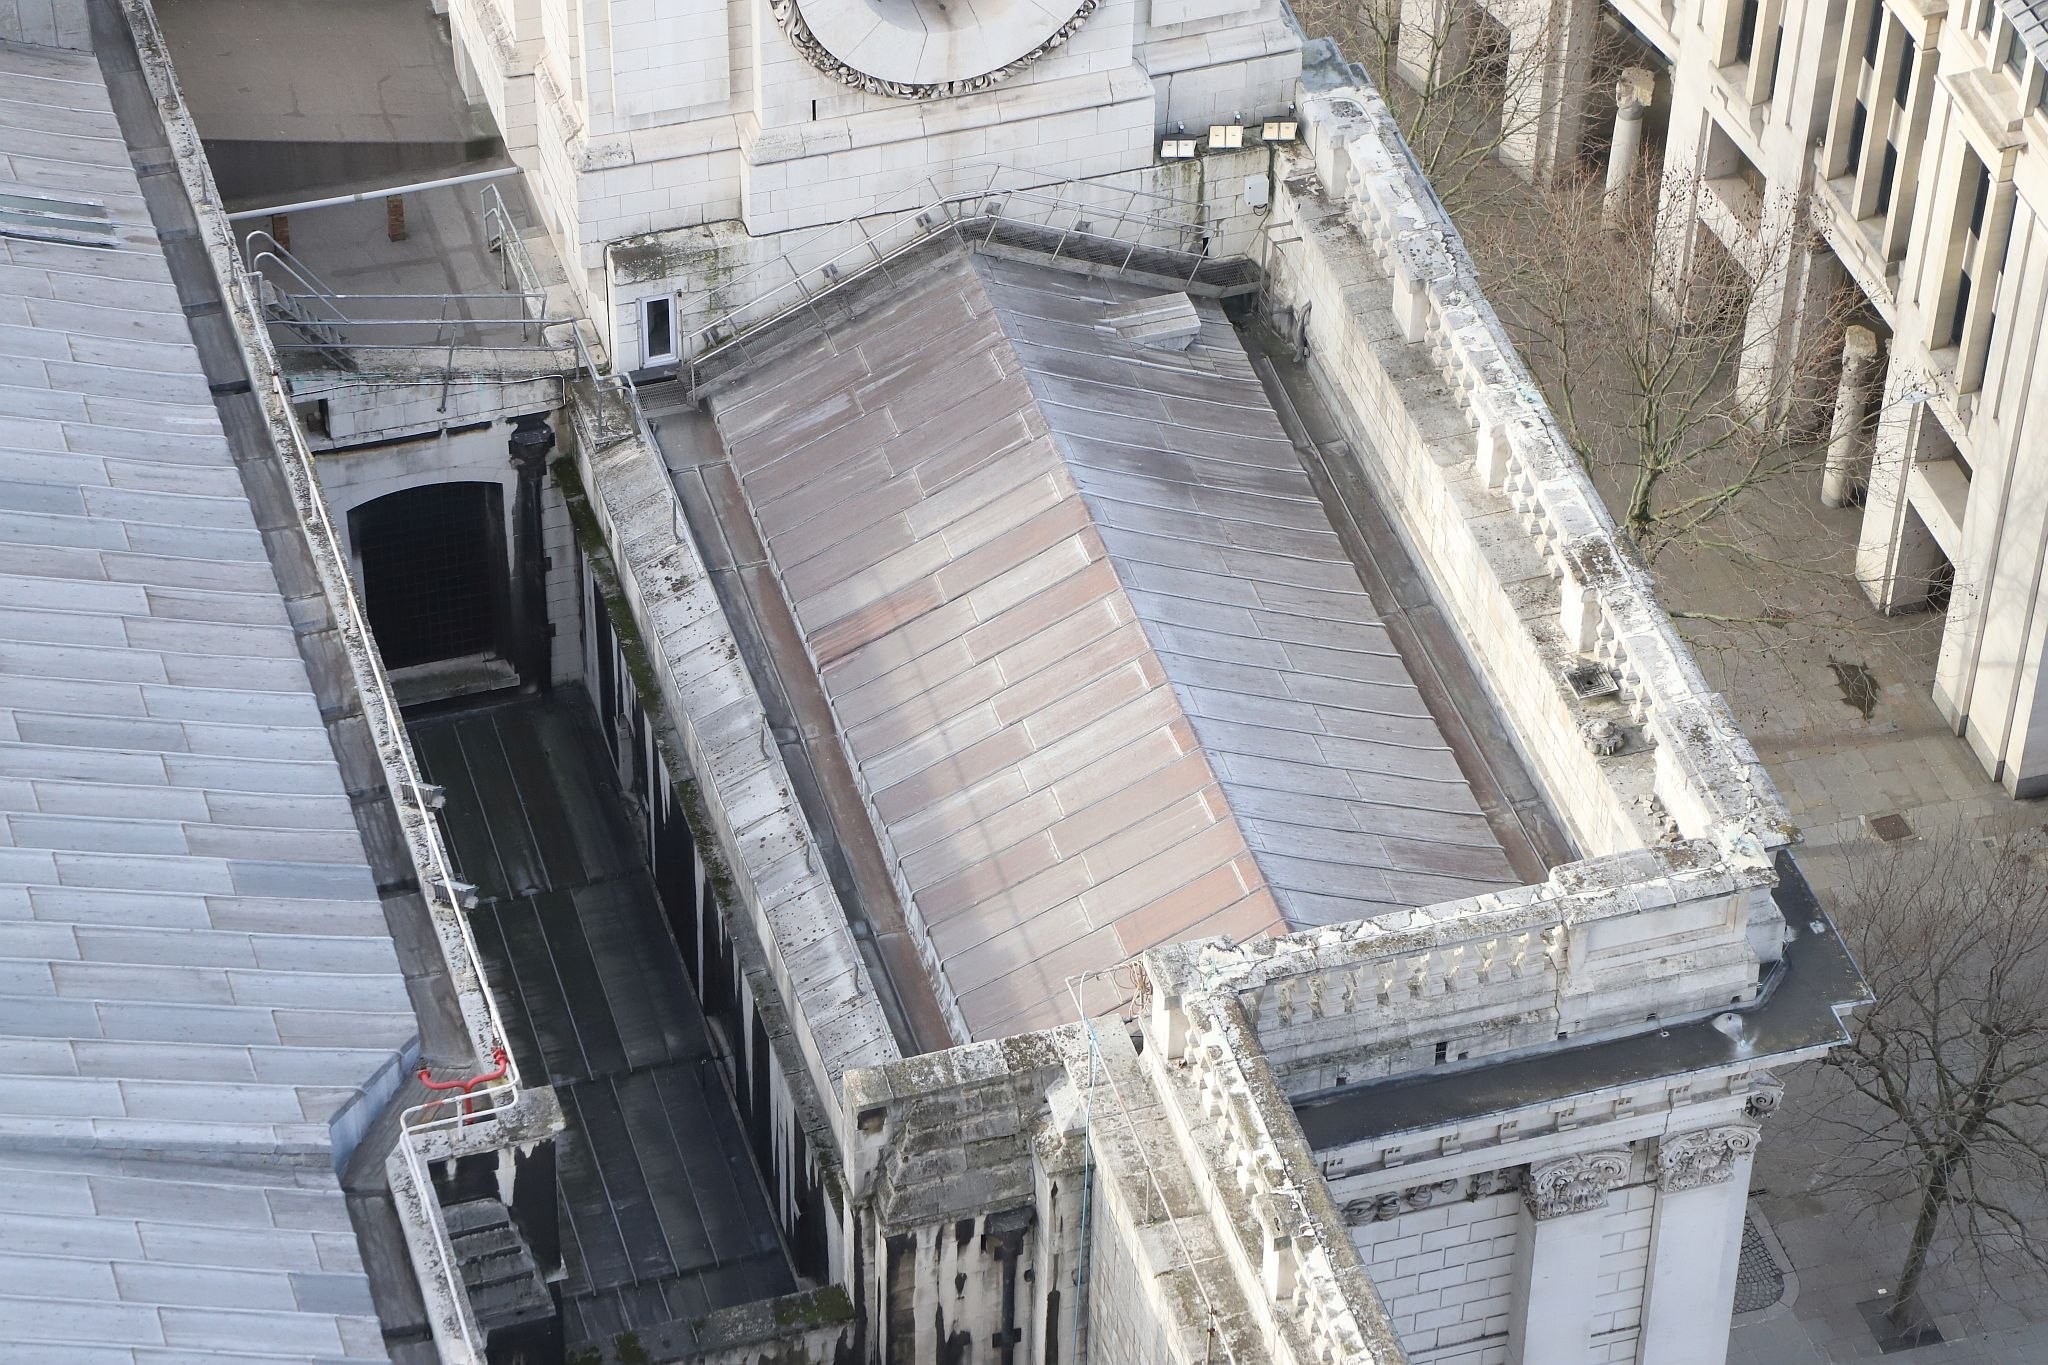 The roof of St. Paul's cathedral seen from the Golden Gallery on the top of the dome showing the roof of the room containing the Great Model. 2023.